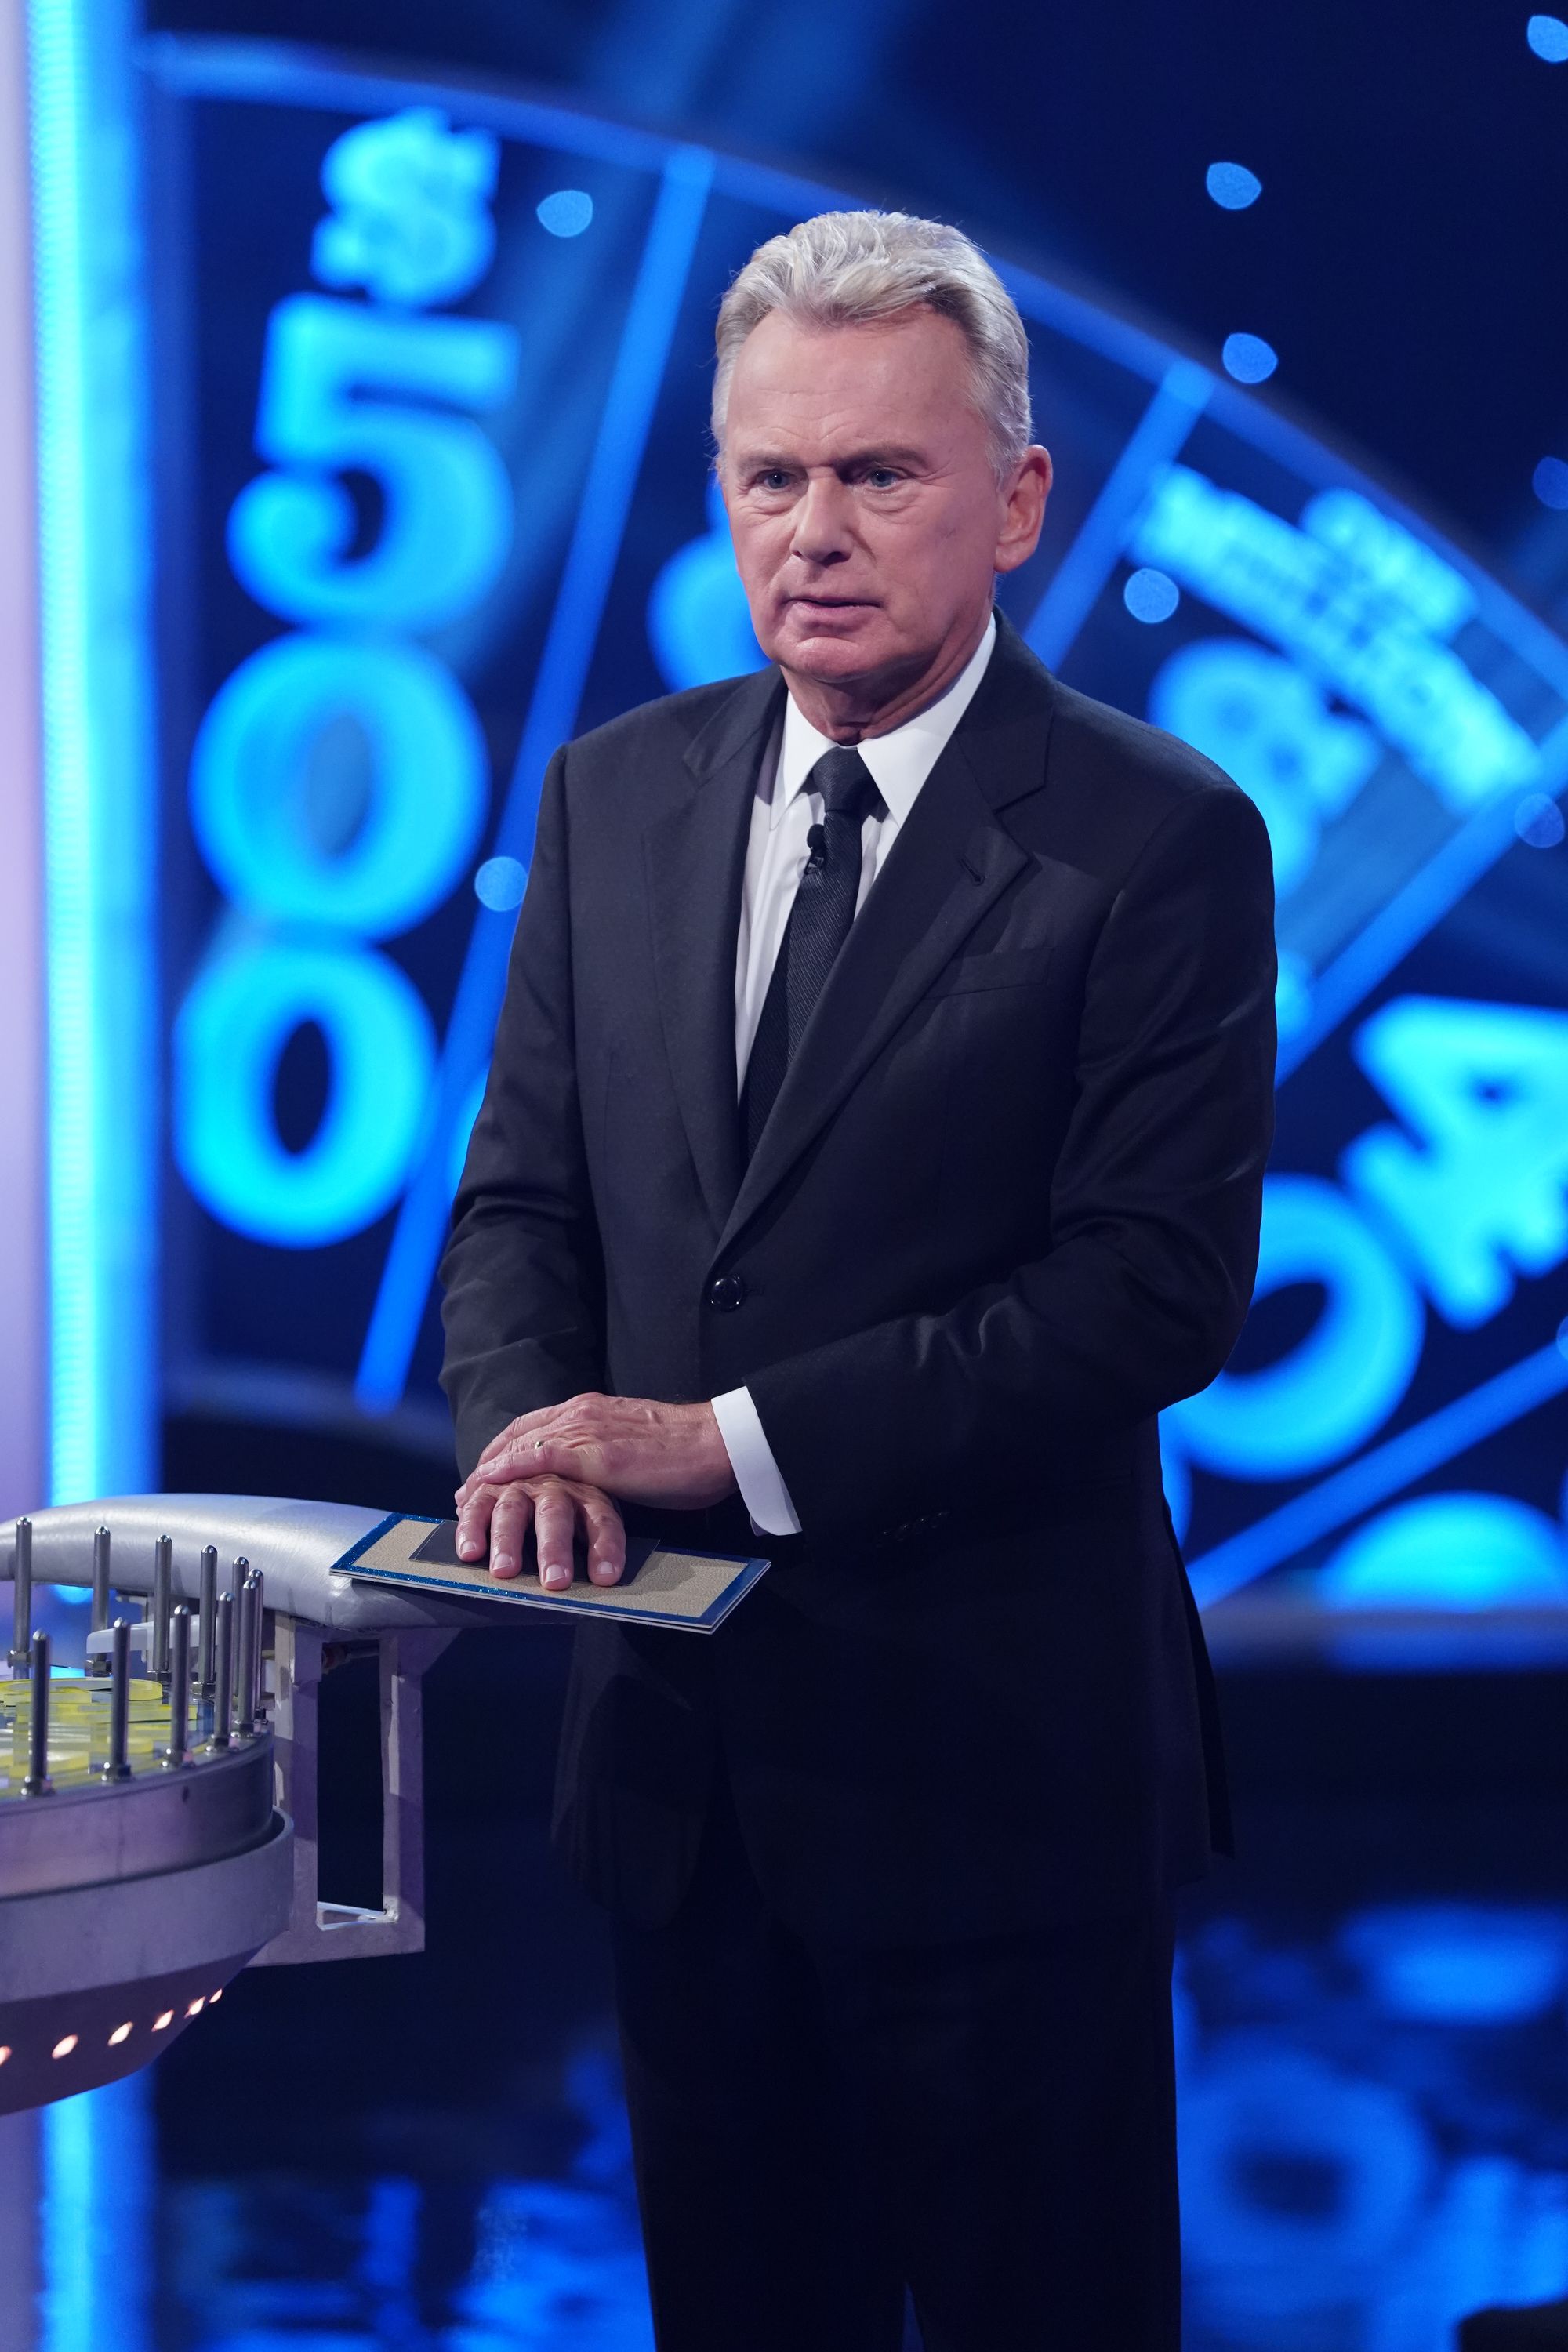 Wheel of Fortune fans shocked after they notice major 'ERROR' as Pat Sajak  reads answer to crossword puzzle challenge